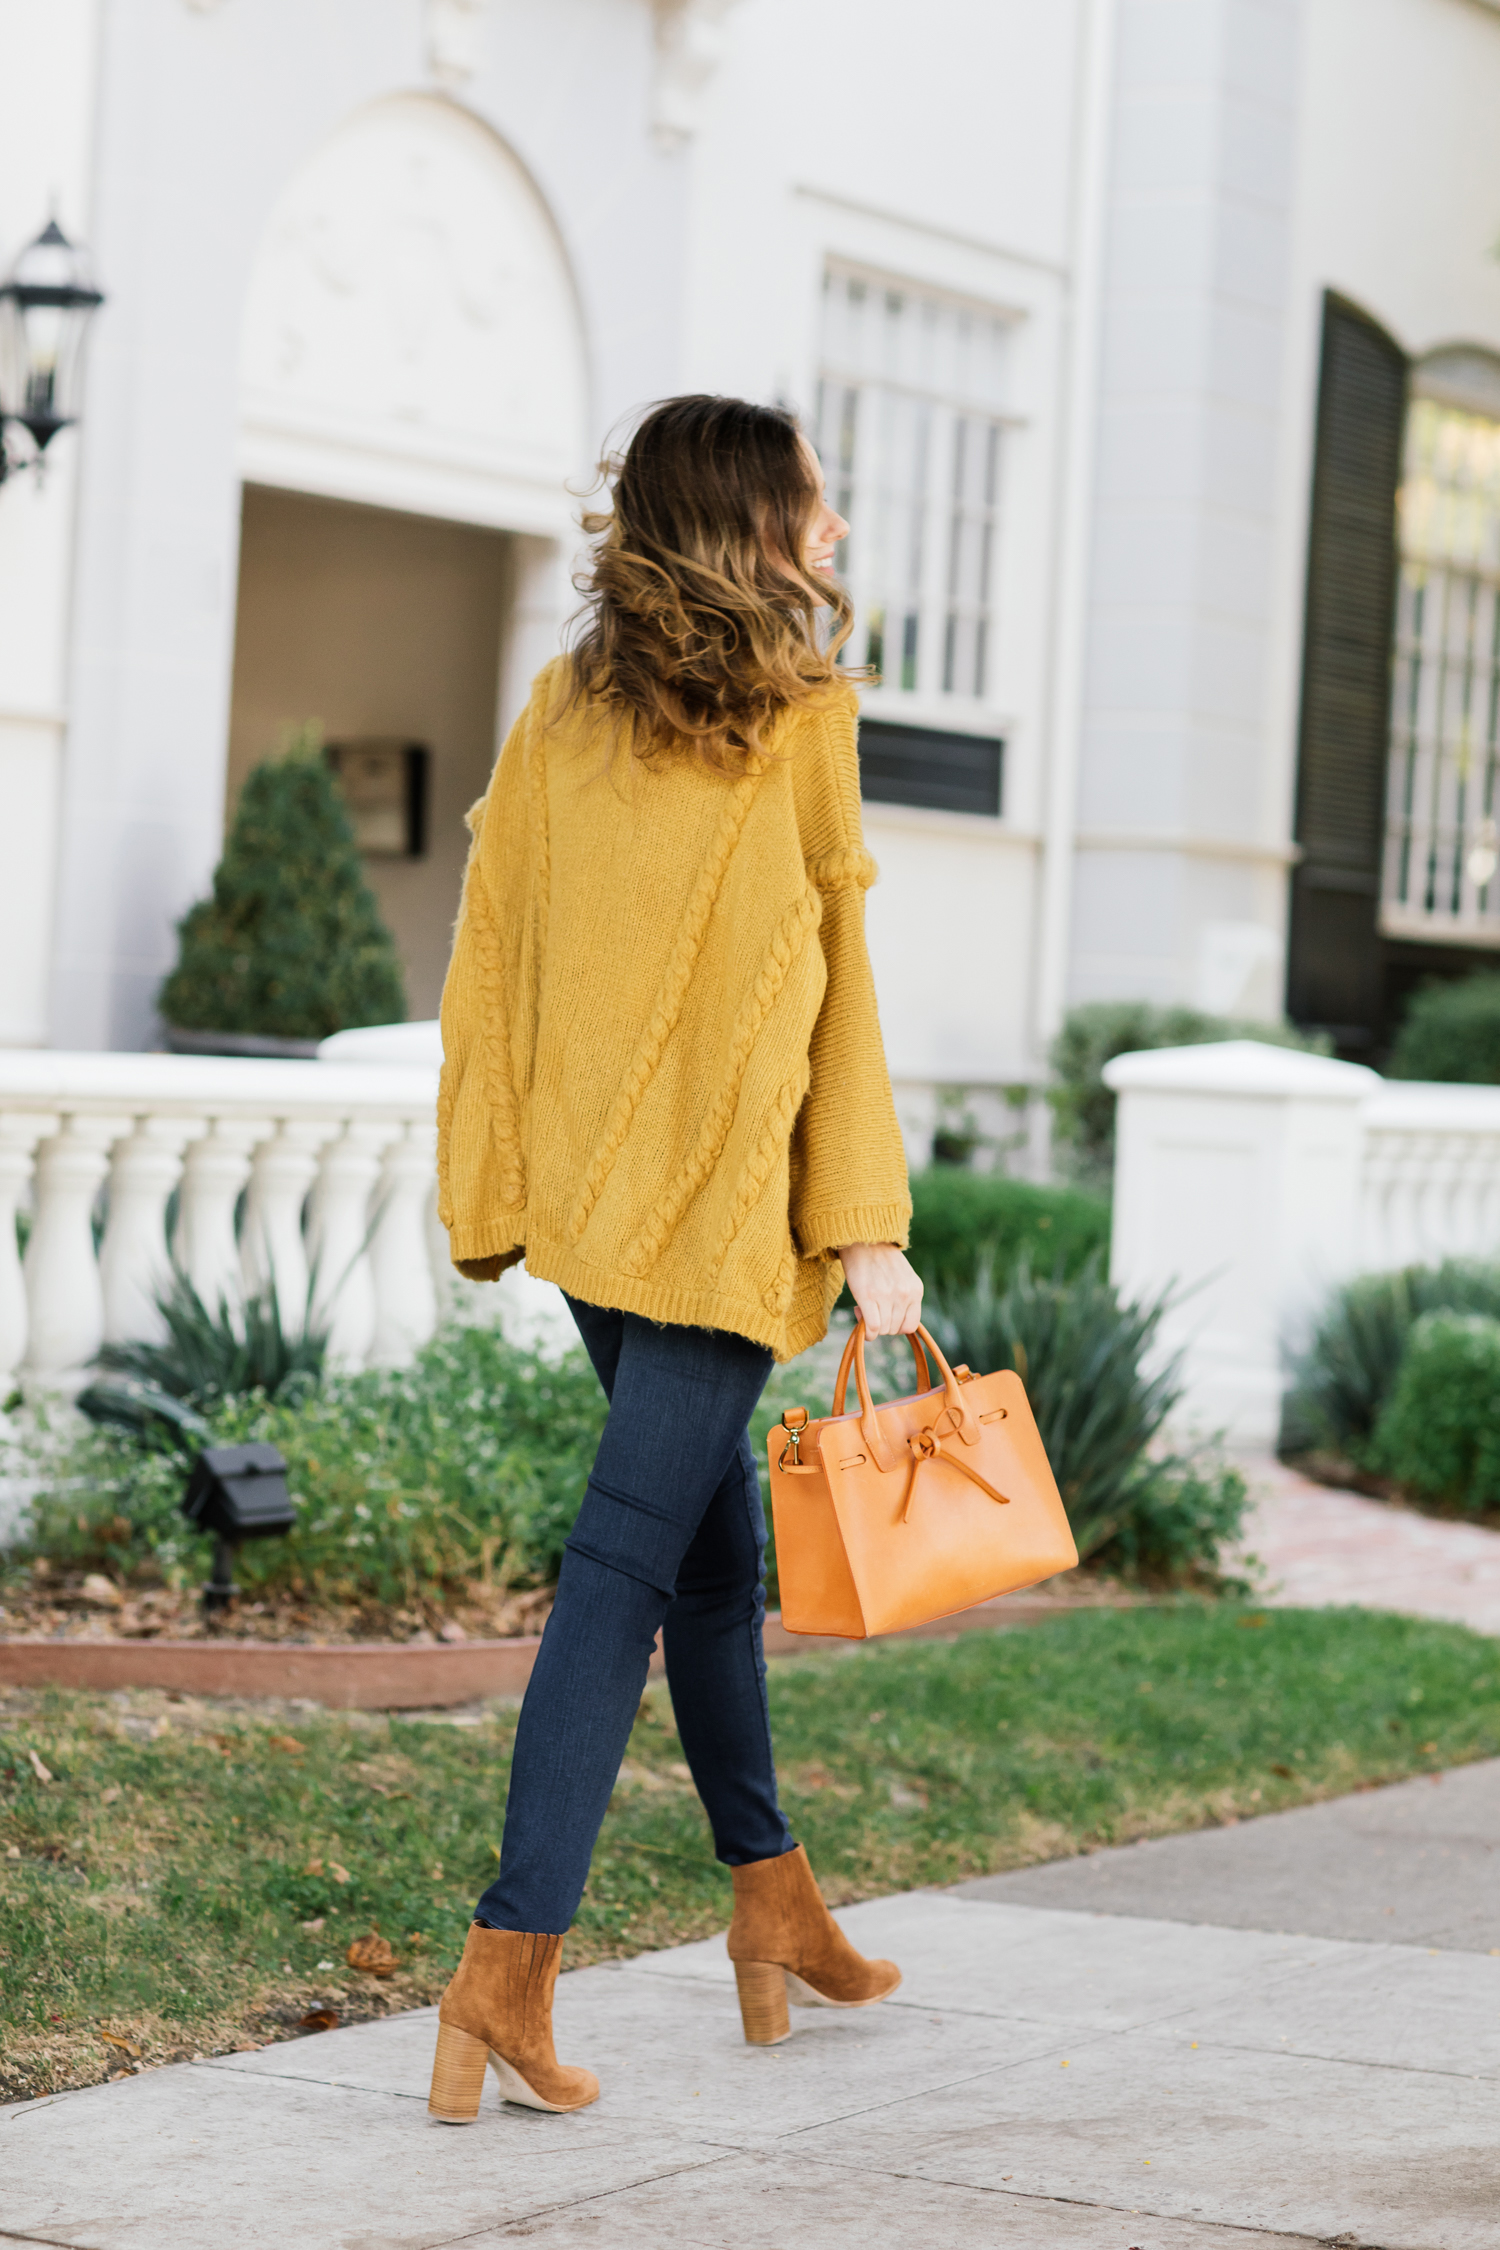 Alyssa Campanella of The A List blog wearing a cozy yellow cardigan and Joie Yara boots for fall